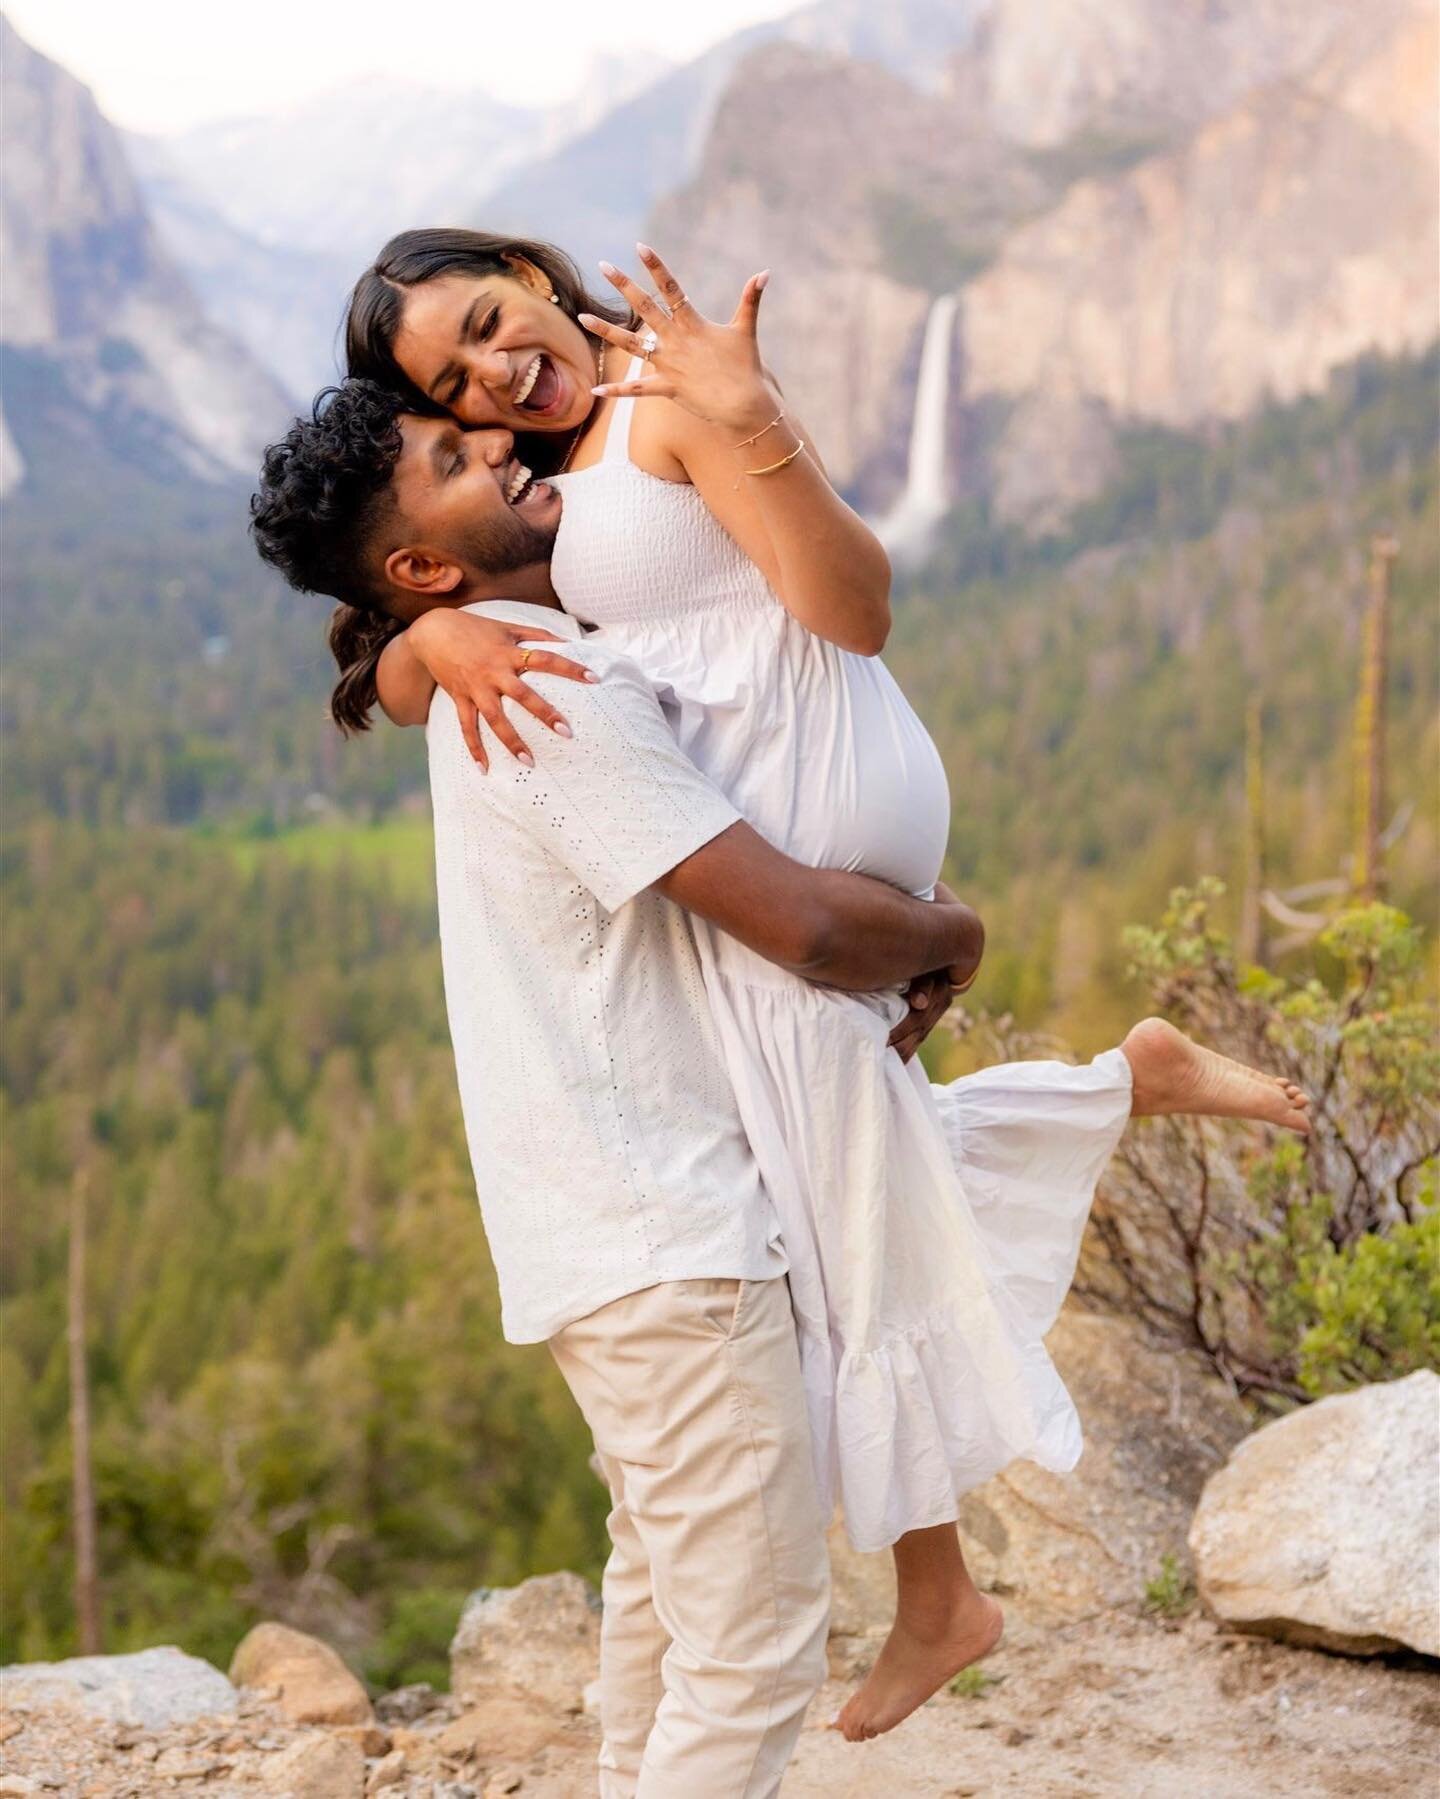 I&rsquo;ll travel around the world and back with you.
&bull;
Email info@memoriesmedia.ca for all your Inquiries.
&bull;
#tamilcouple #california #yosemite #travelling